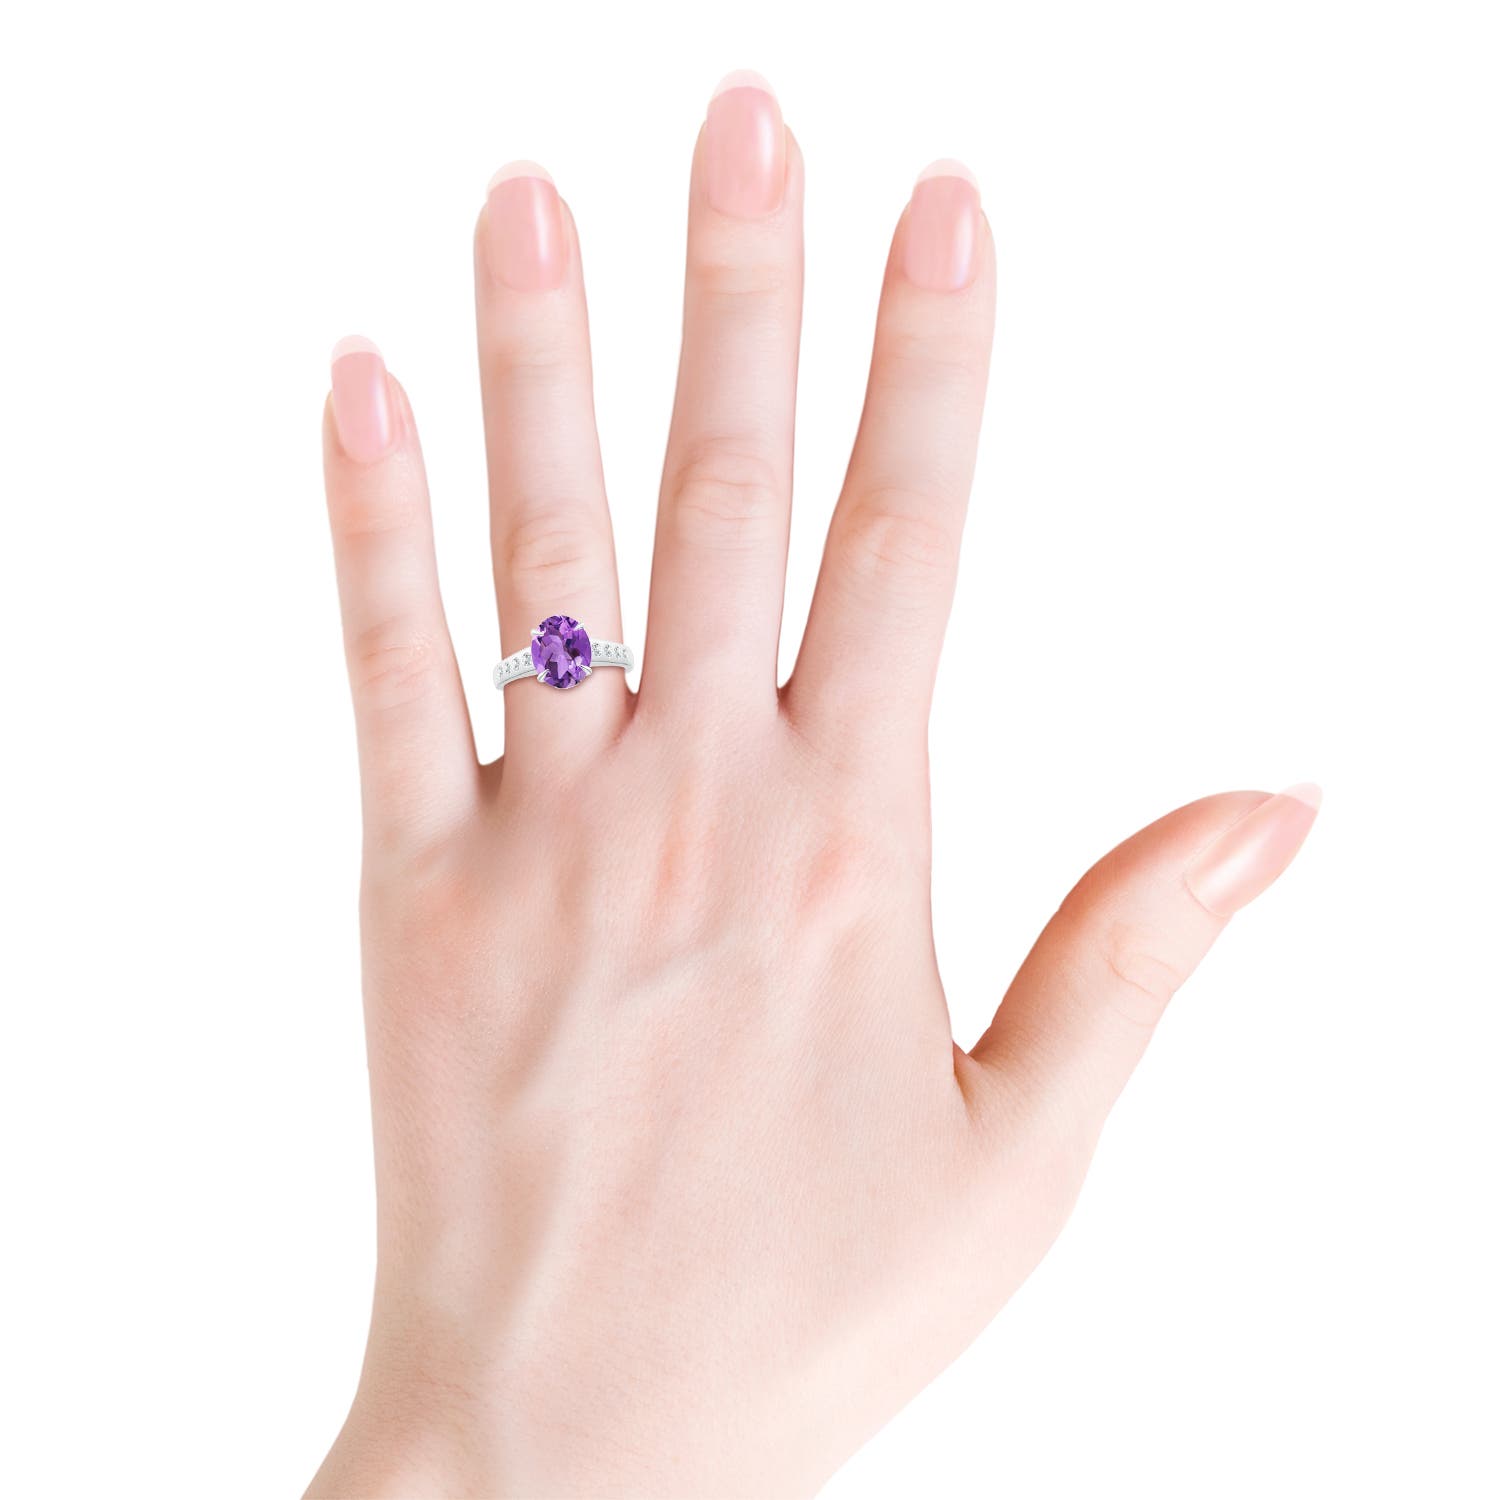 AA - Amethyst / 2.5 CT / 14 KT White Gold